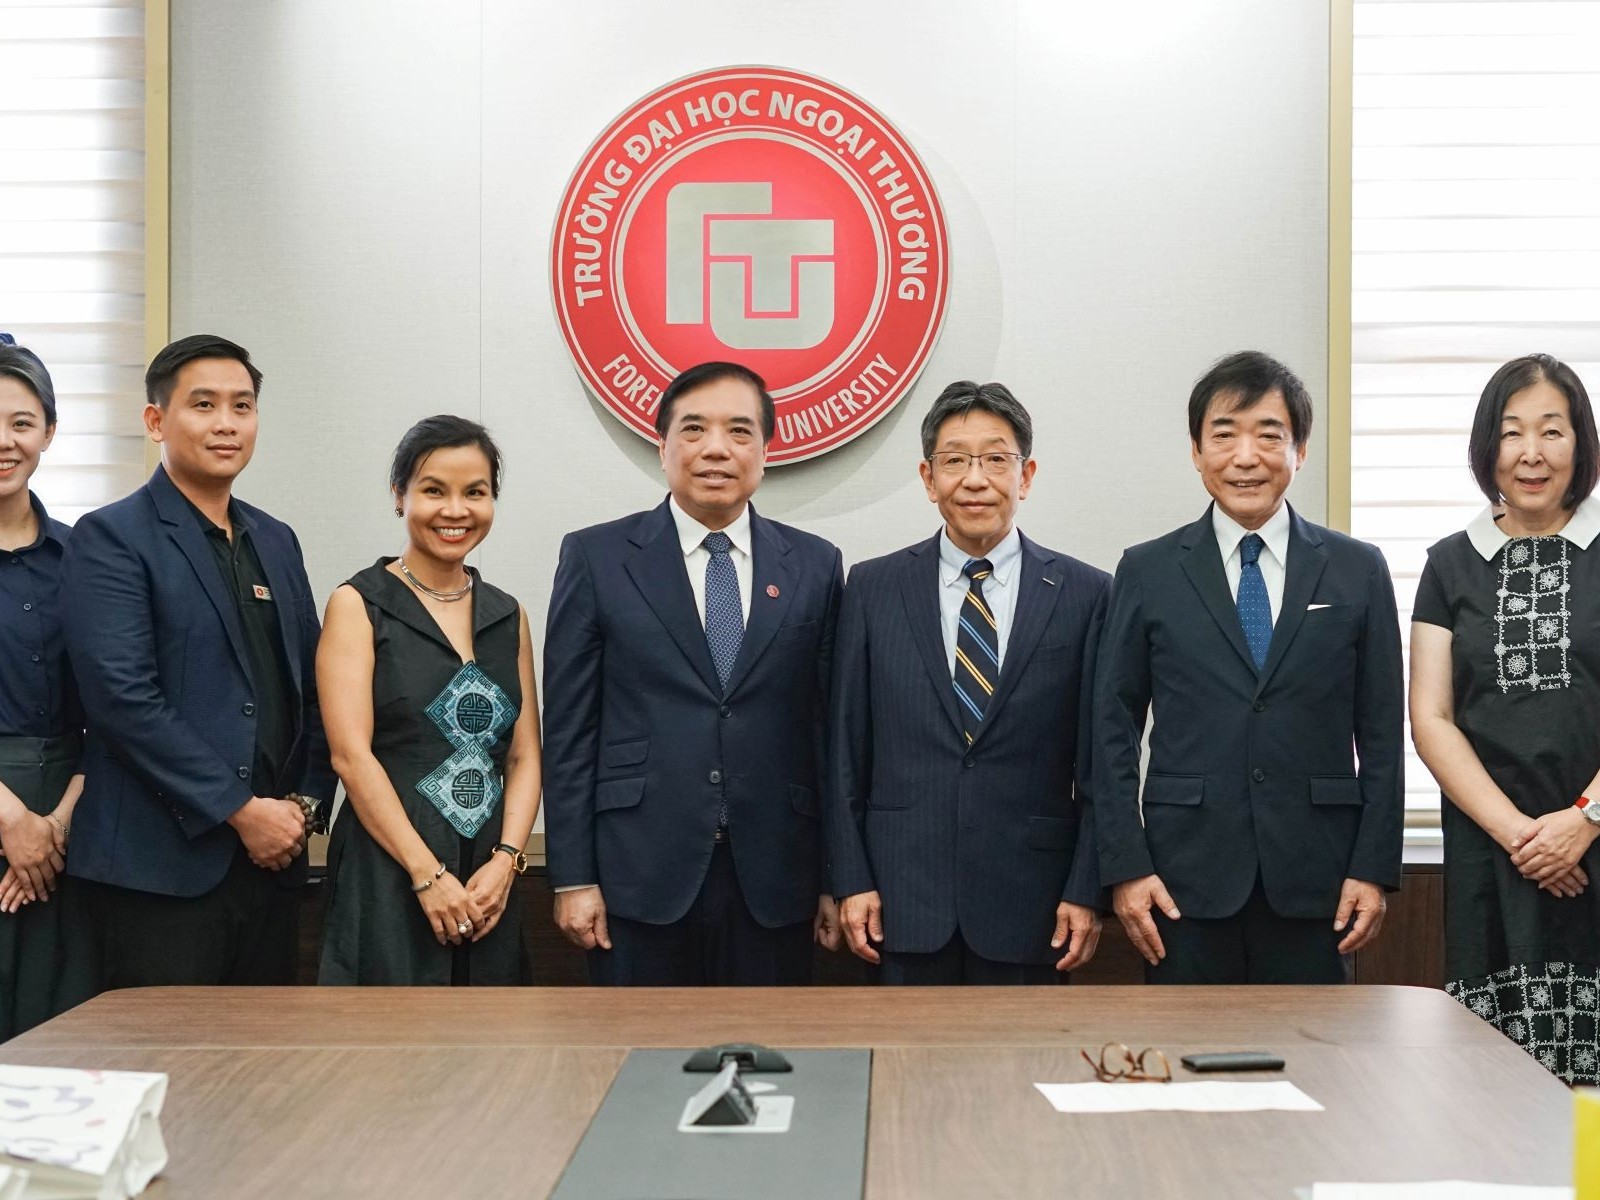 DELEGATIONS FROM HYOGO UNIVERSITY TO FOREIGN TRADE UNIVERSITY